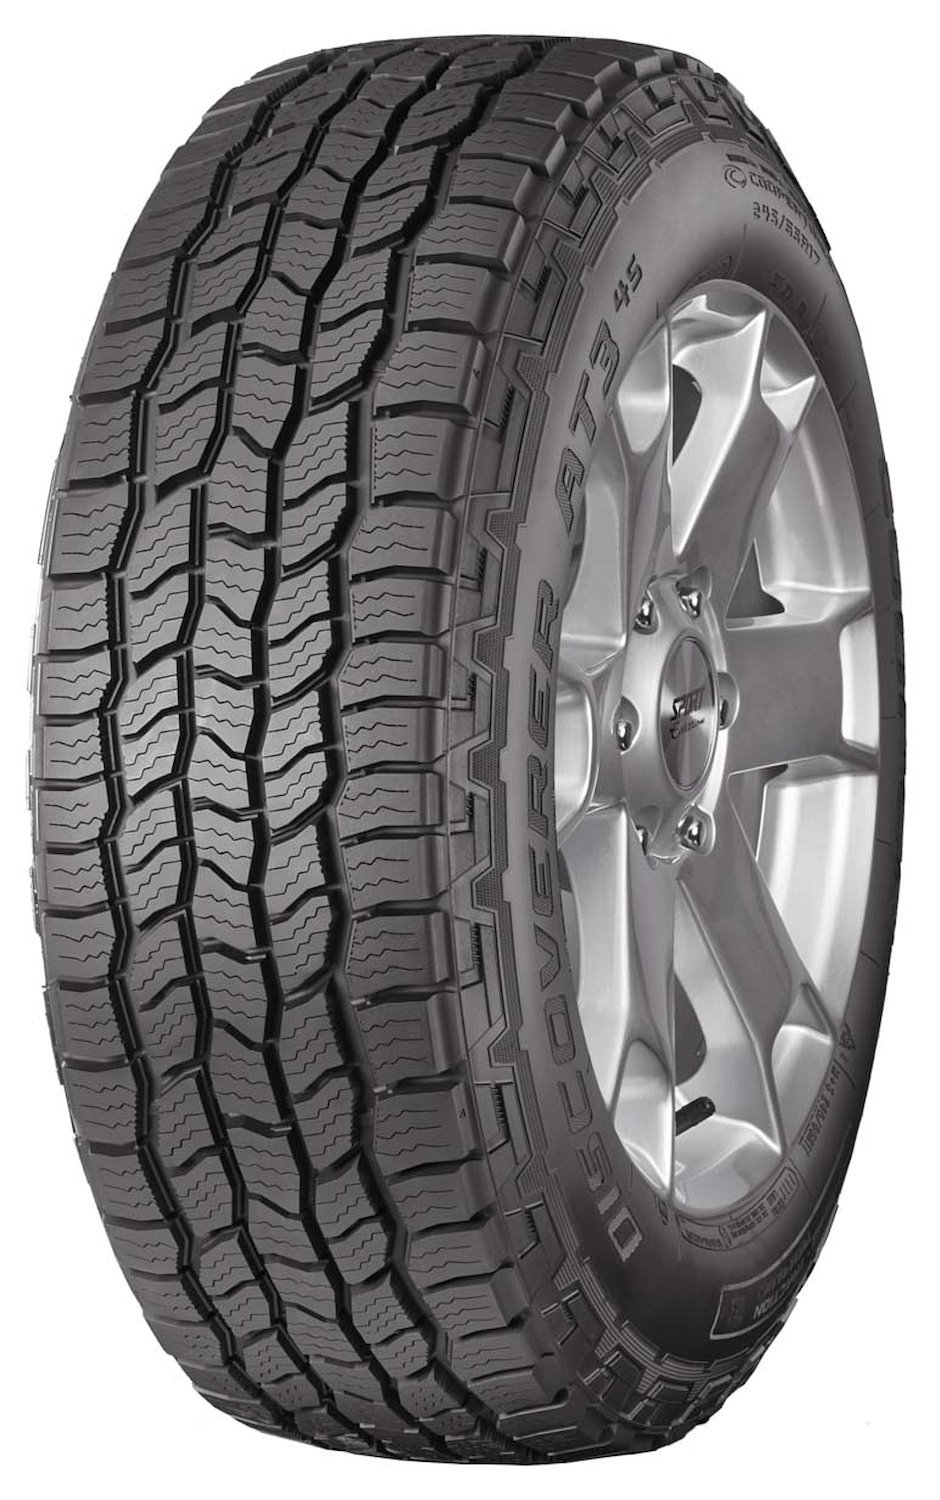 Discoverer AT3 4S All-Terrain Tire, 235/65R17